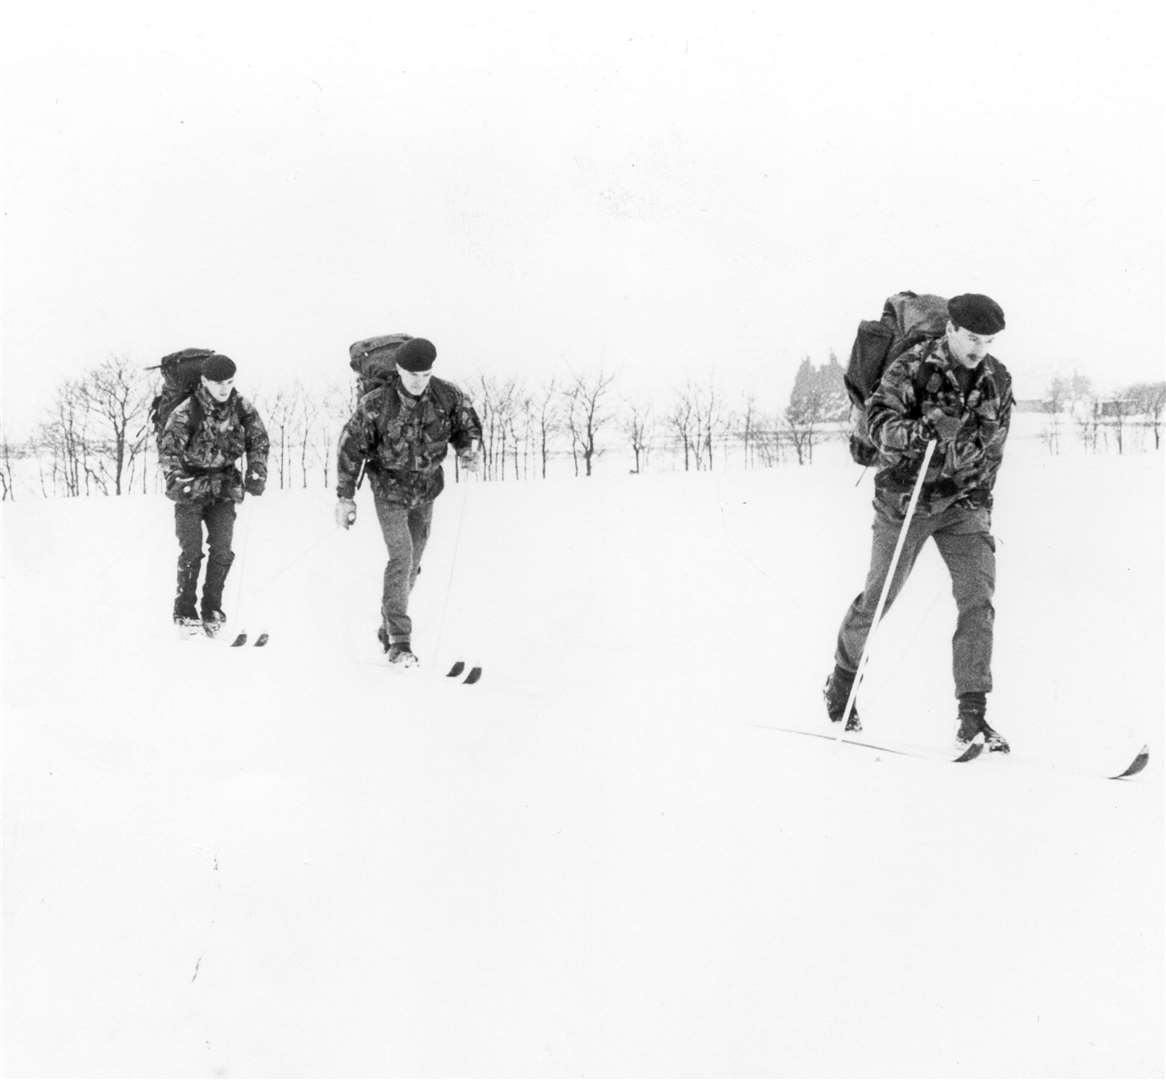 For soldiers trained in the Arctic, the heavy snow falls across Kent proved no problem